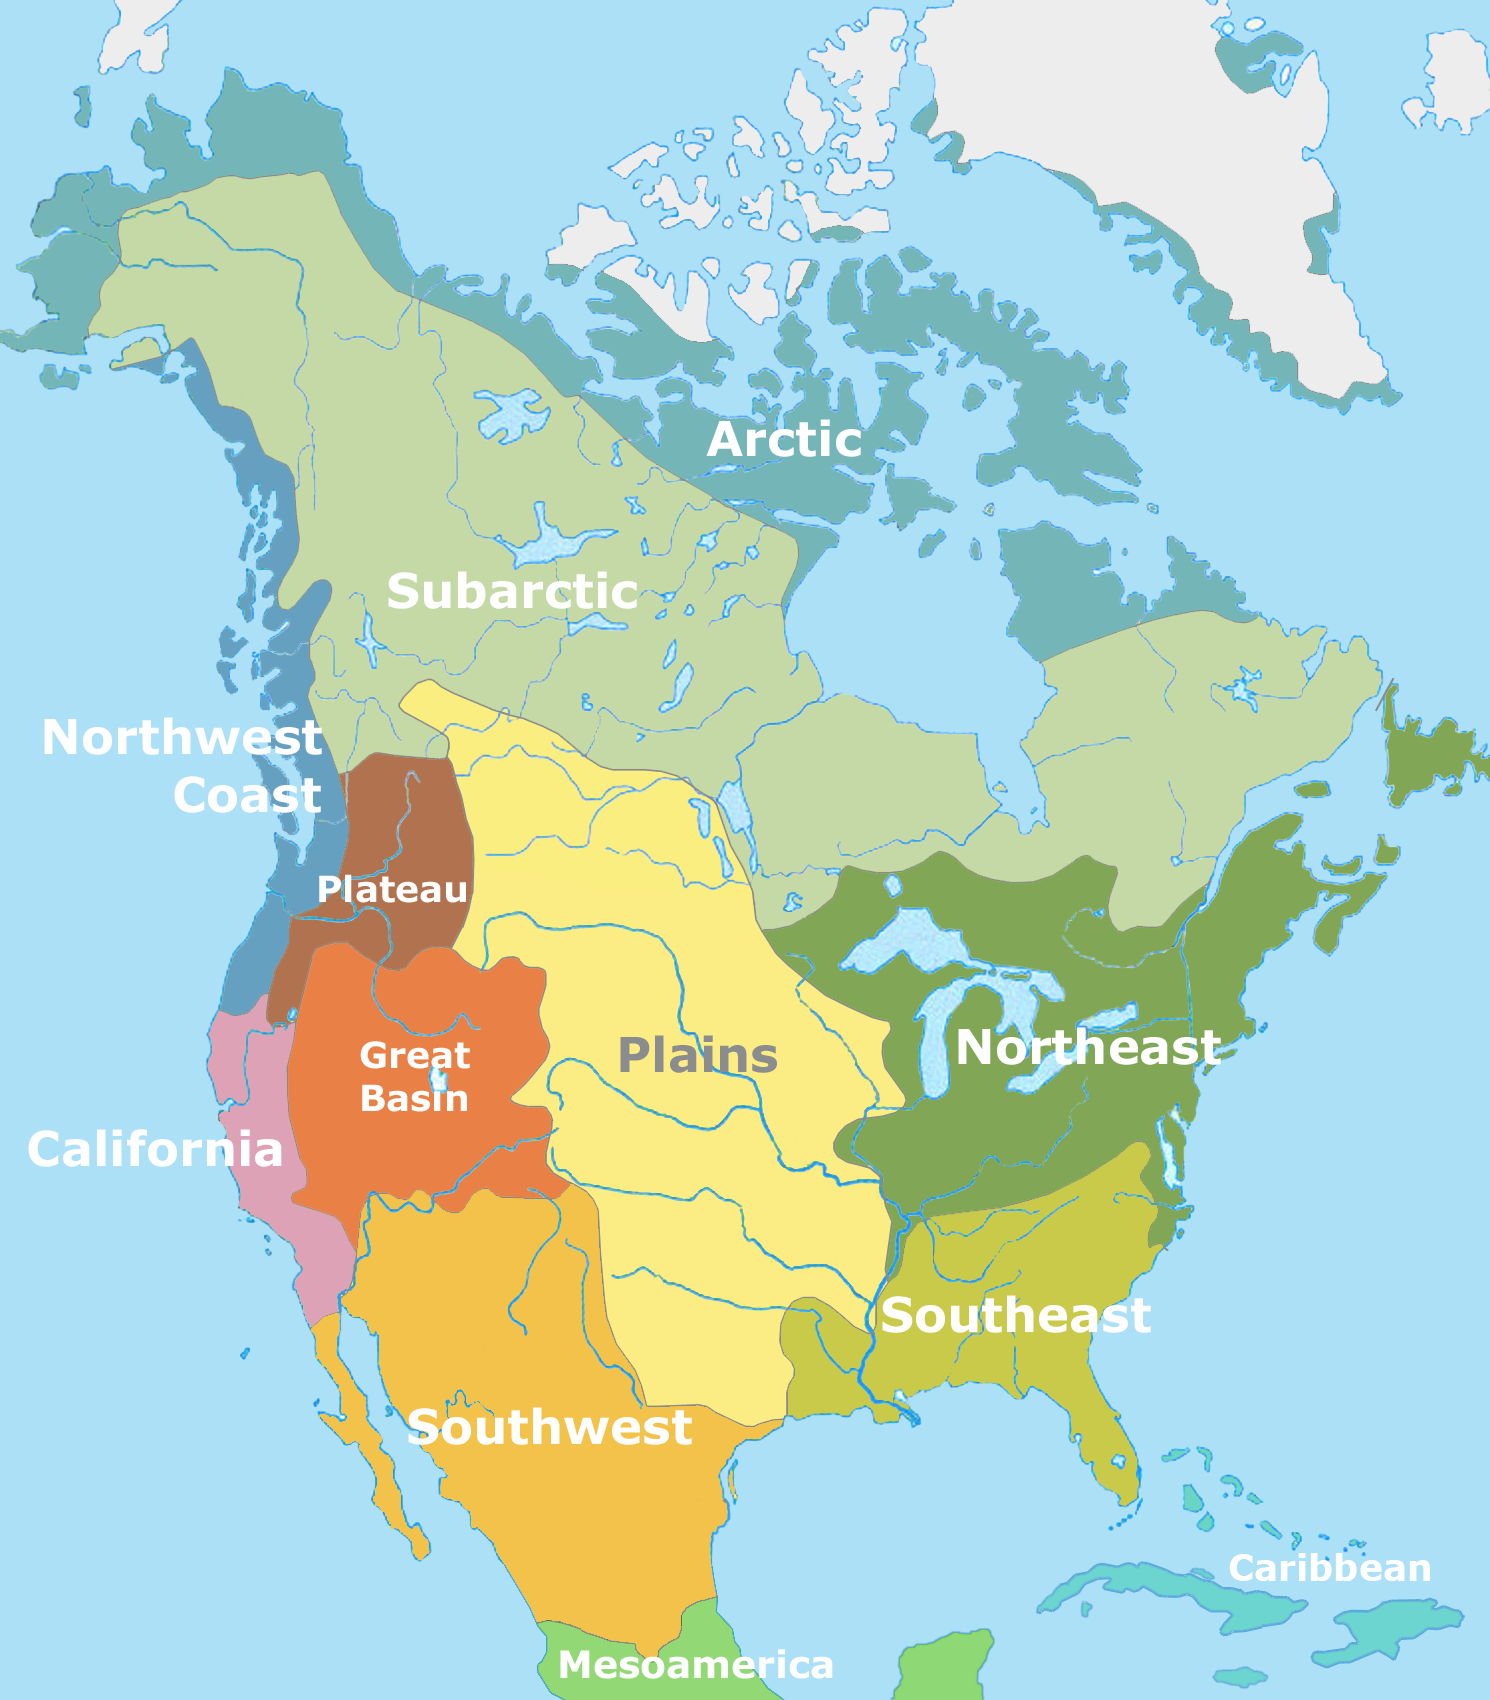 A coloured map of North America showing the six Indigenous cultural regions which codify the climate, outlook, and way of life of the people in them.